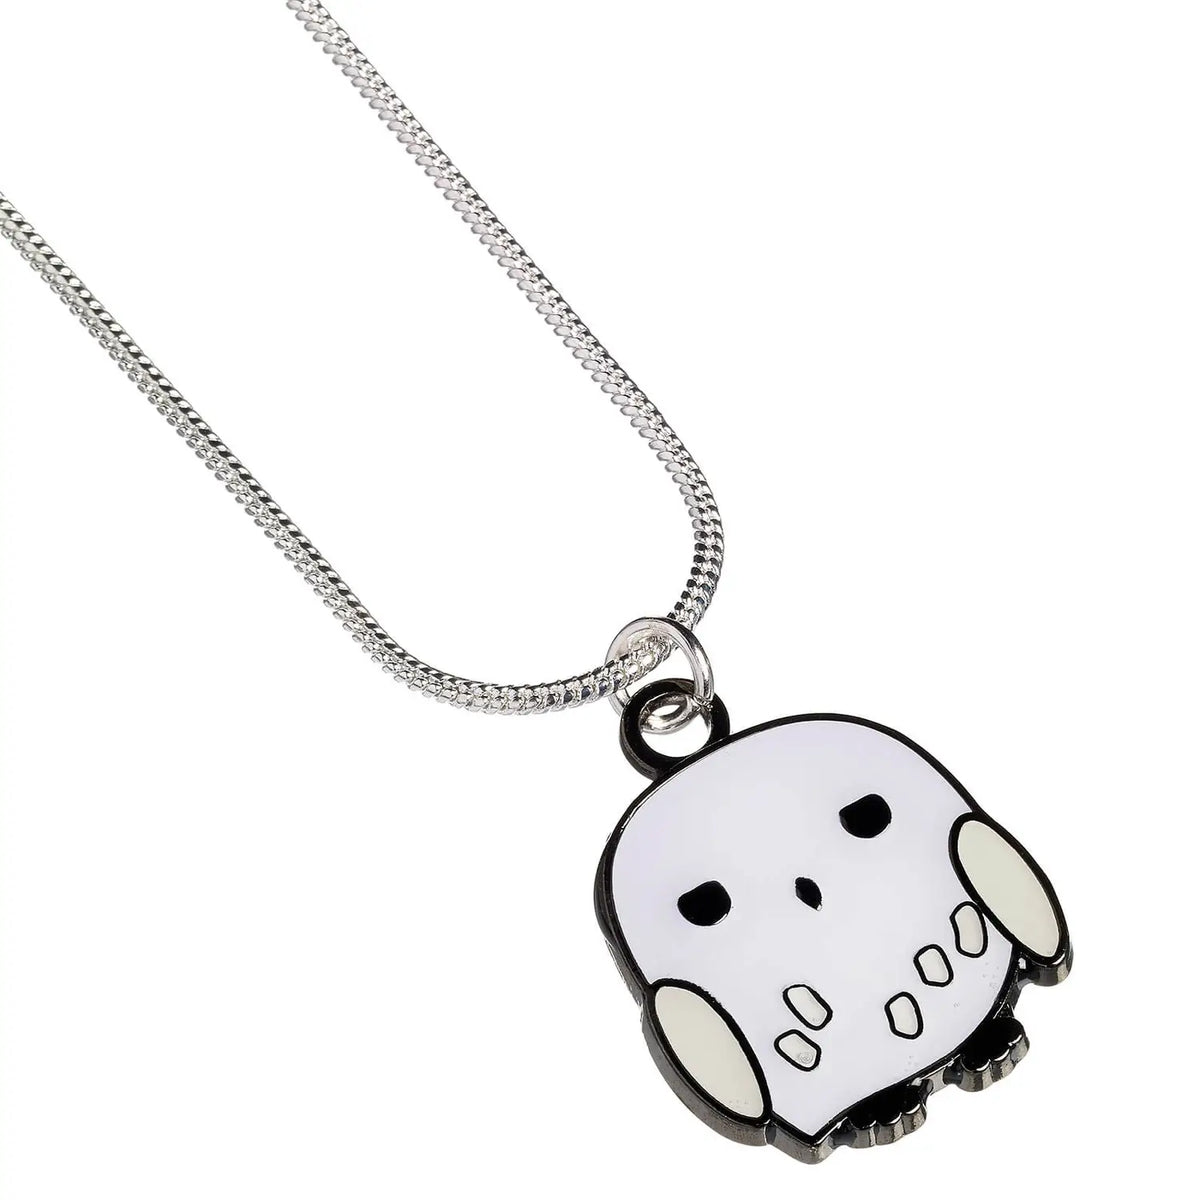 Chibi Hedwig Necklace from House of Spells